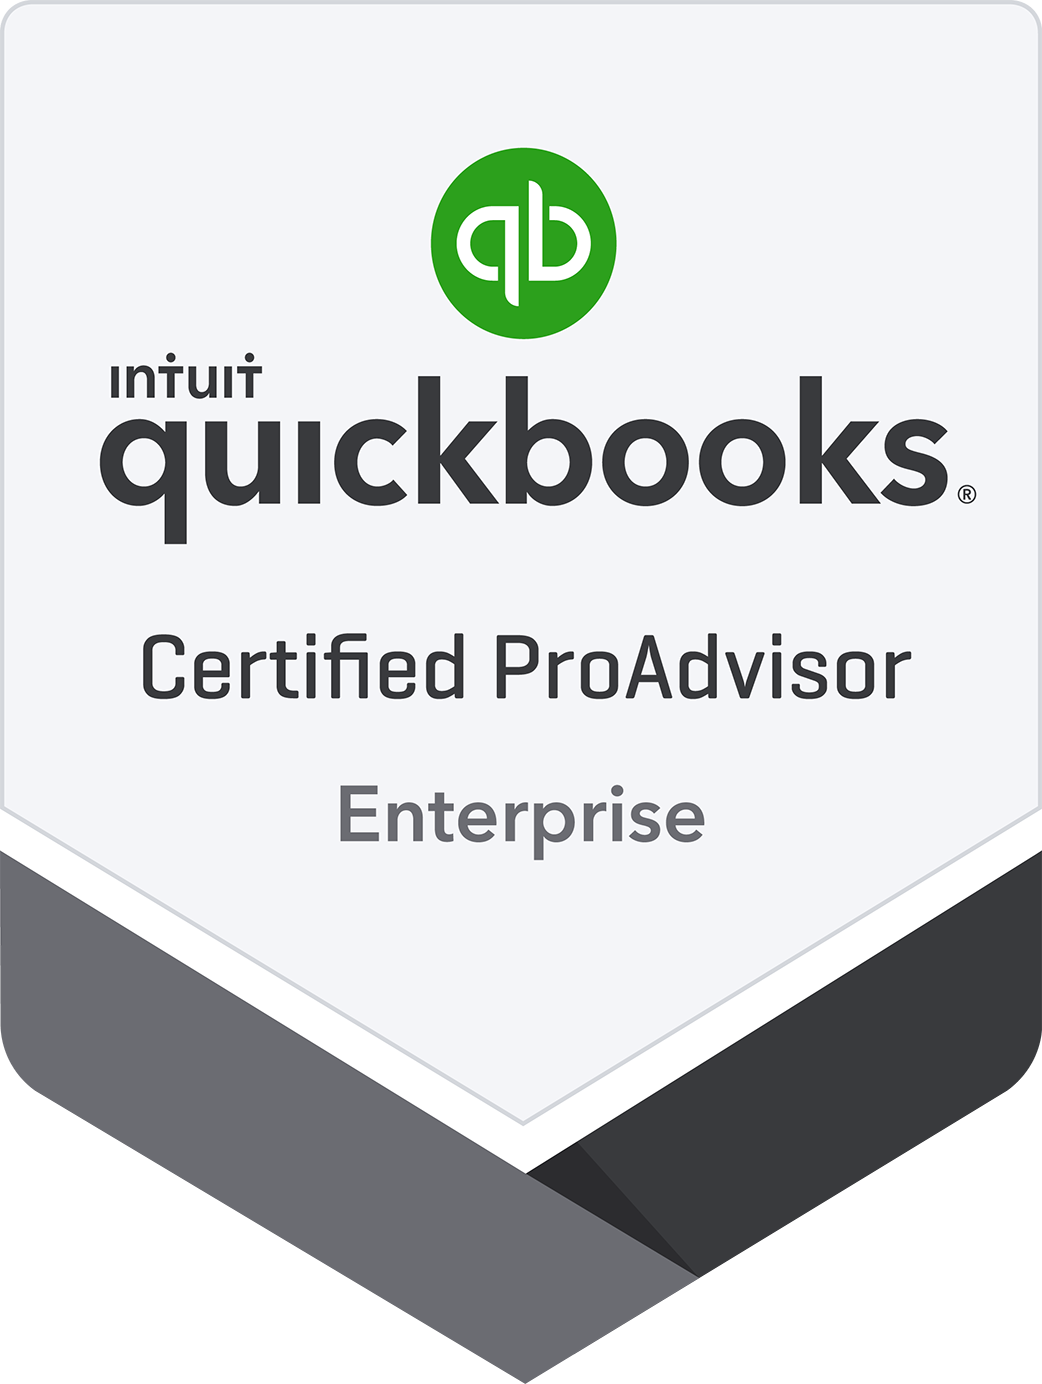 Certified in Intuit QuickBooks Enterprise (hosted or on a local server) for versions 19.0, 17.0, 15.0, 11.0, 9.0, and 7.0 and a reseller who provides the product for up to 20% off for life than Intuit. No certification was offered for the versions in between.